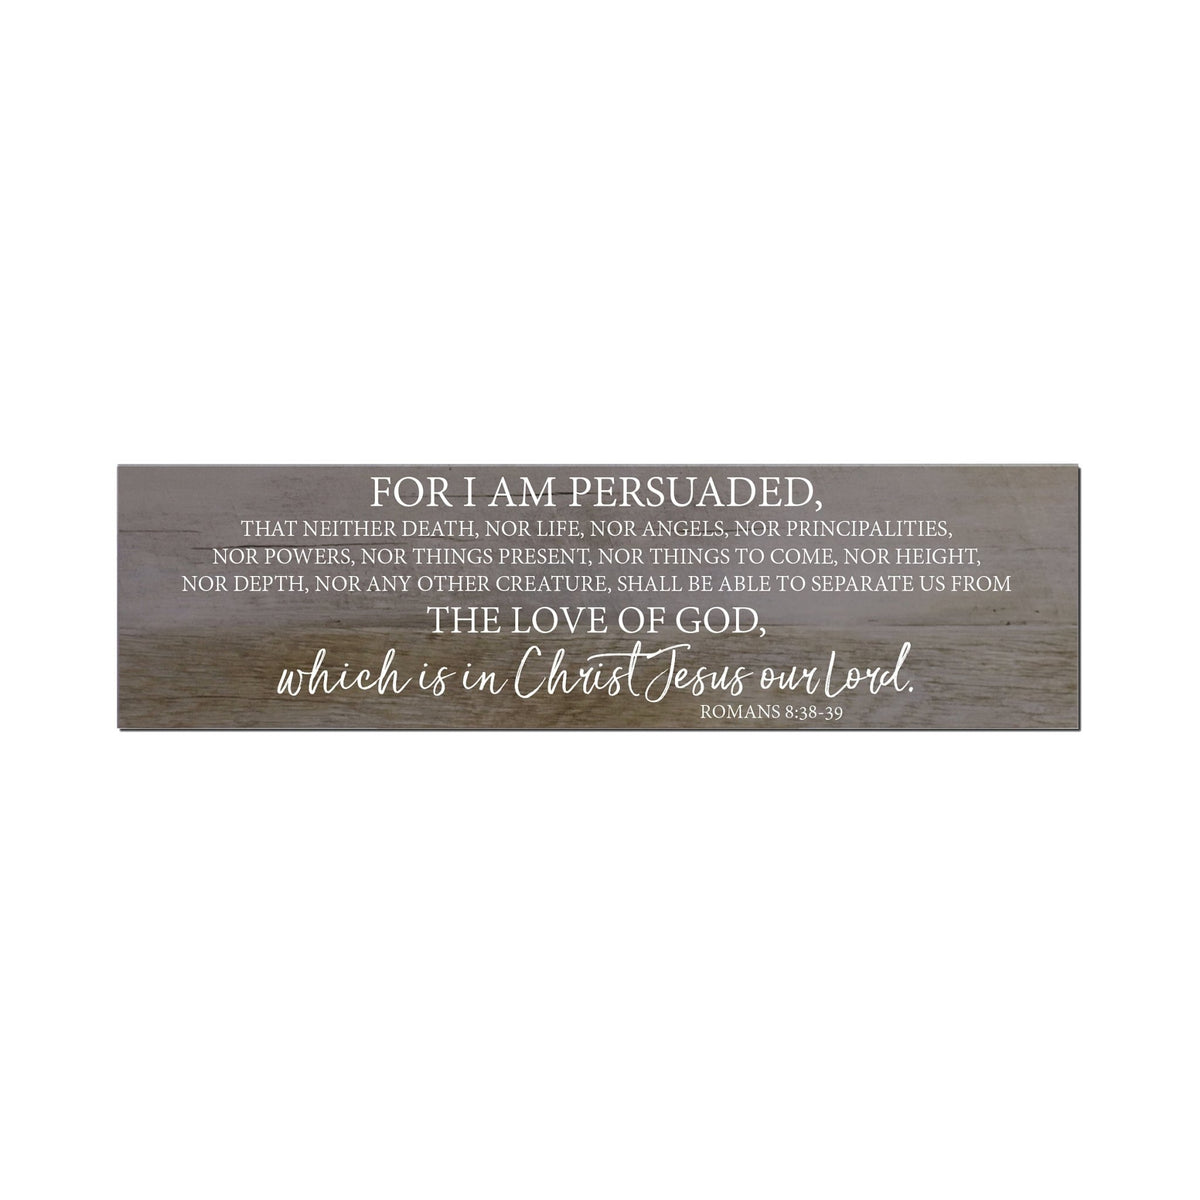 Inspirational Modern Wooden Wall Hanging Family Plaque 22.5x6 - For I am Persuaded - LifeSong Milestones